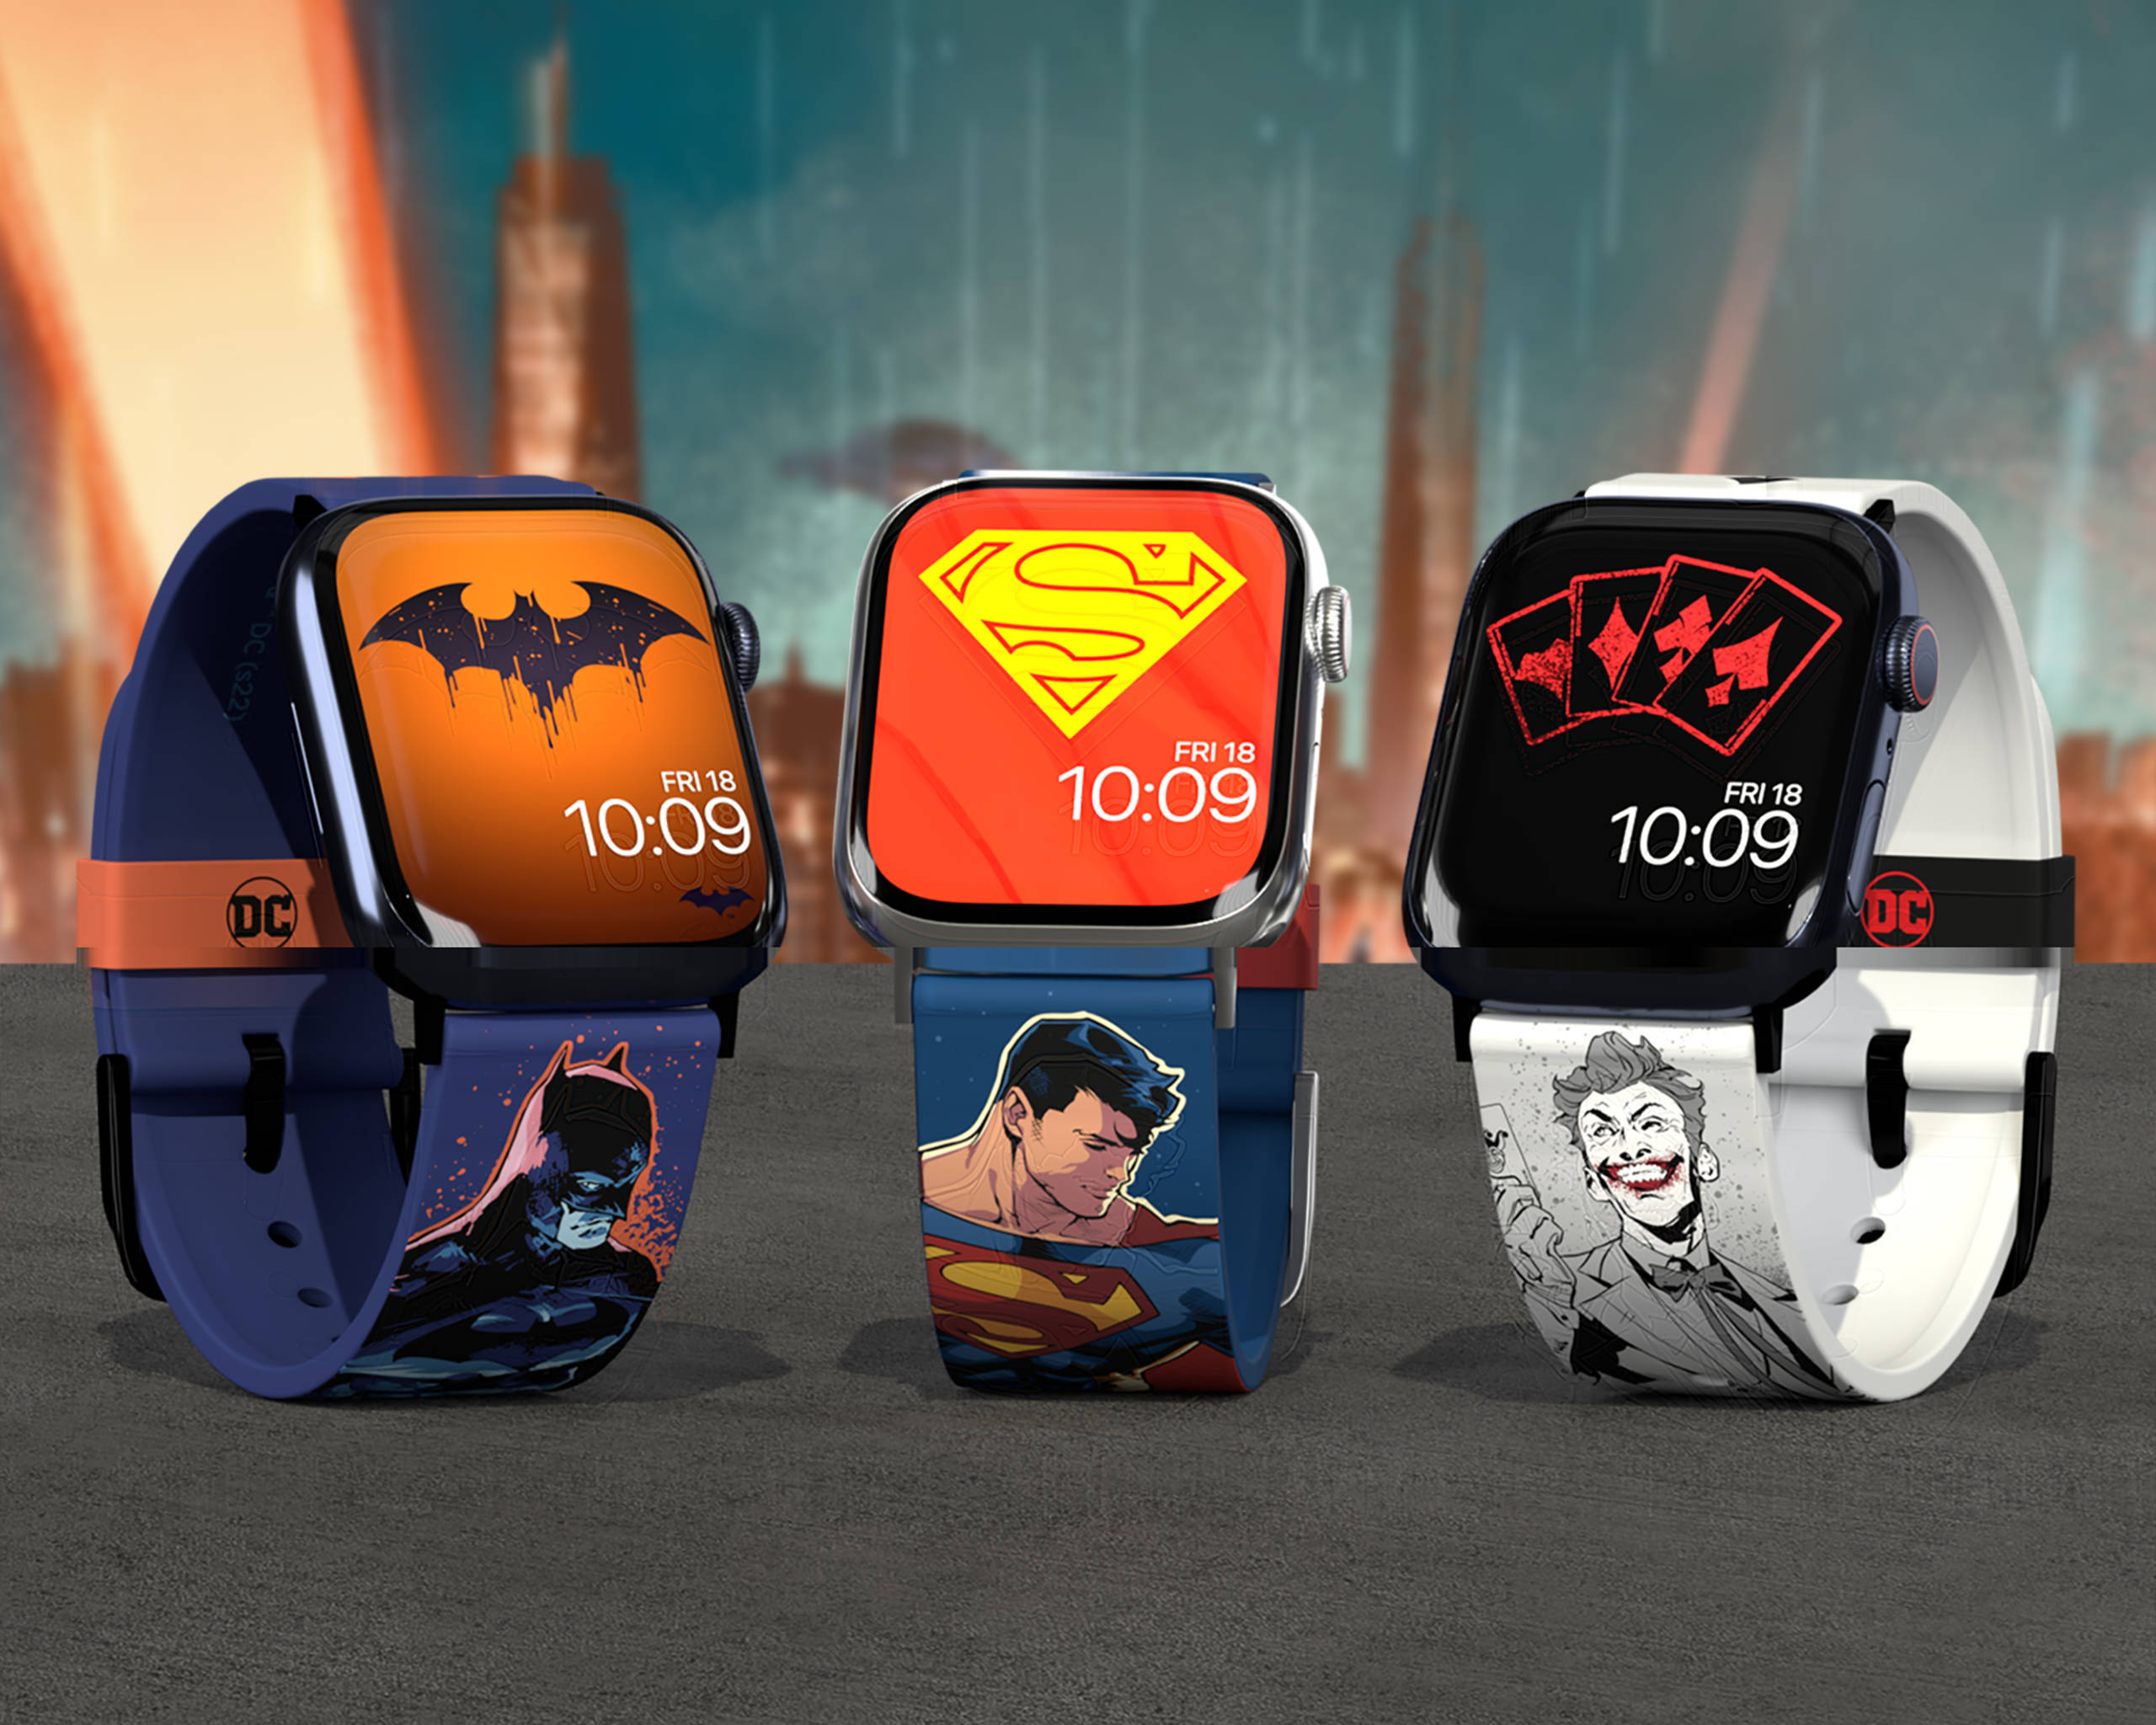 Put Your Favorite DC Characters on Display With These Stylish MobyFox Smartwatch Bands